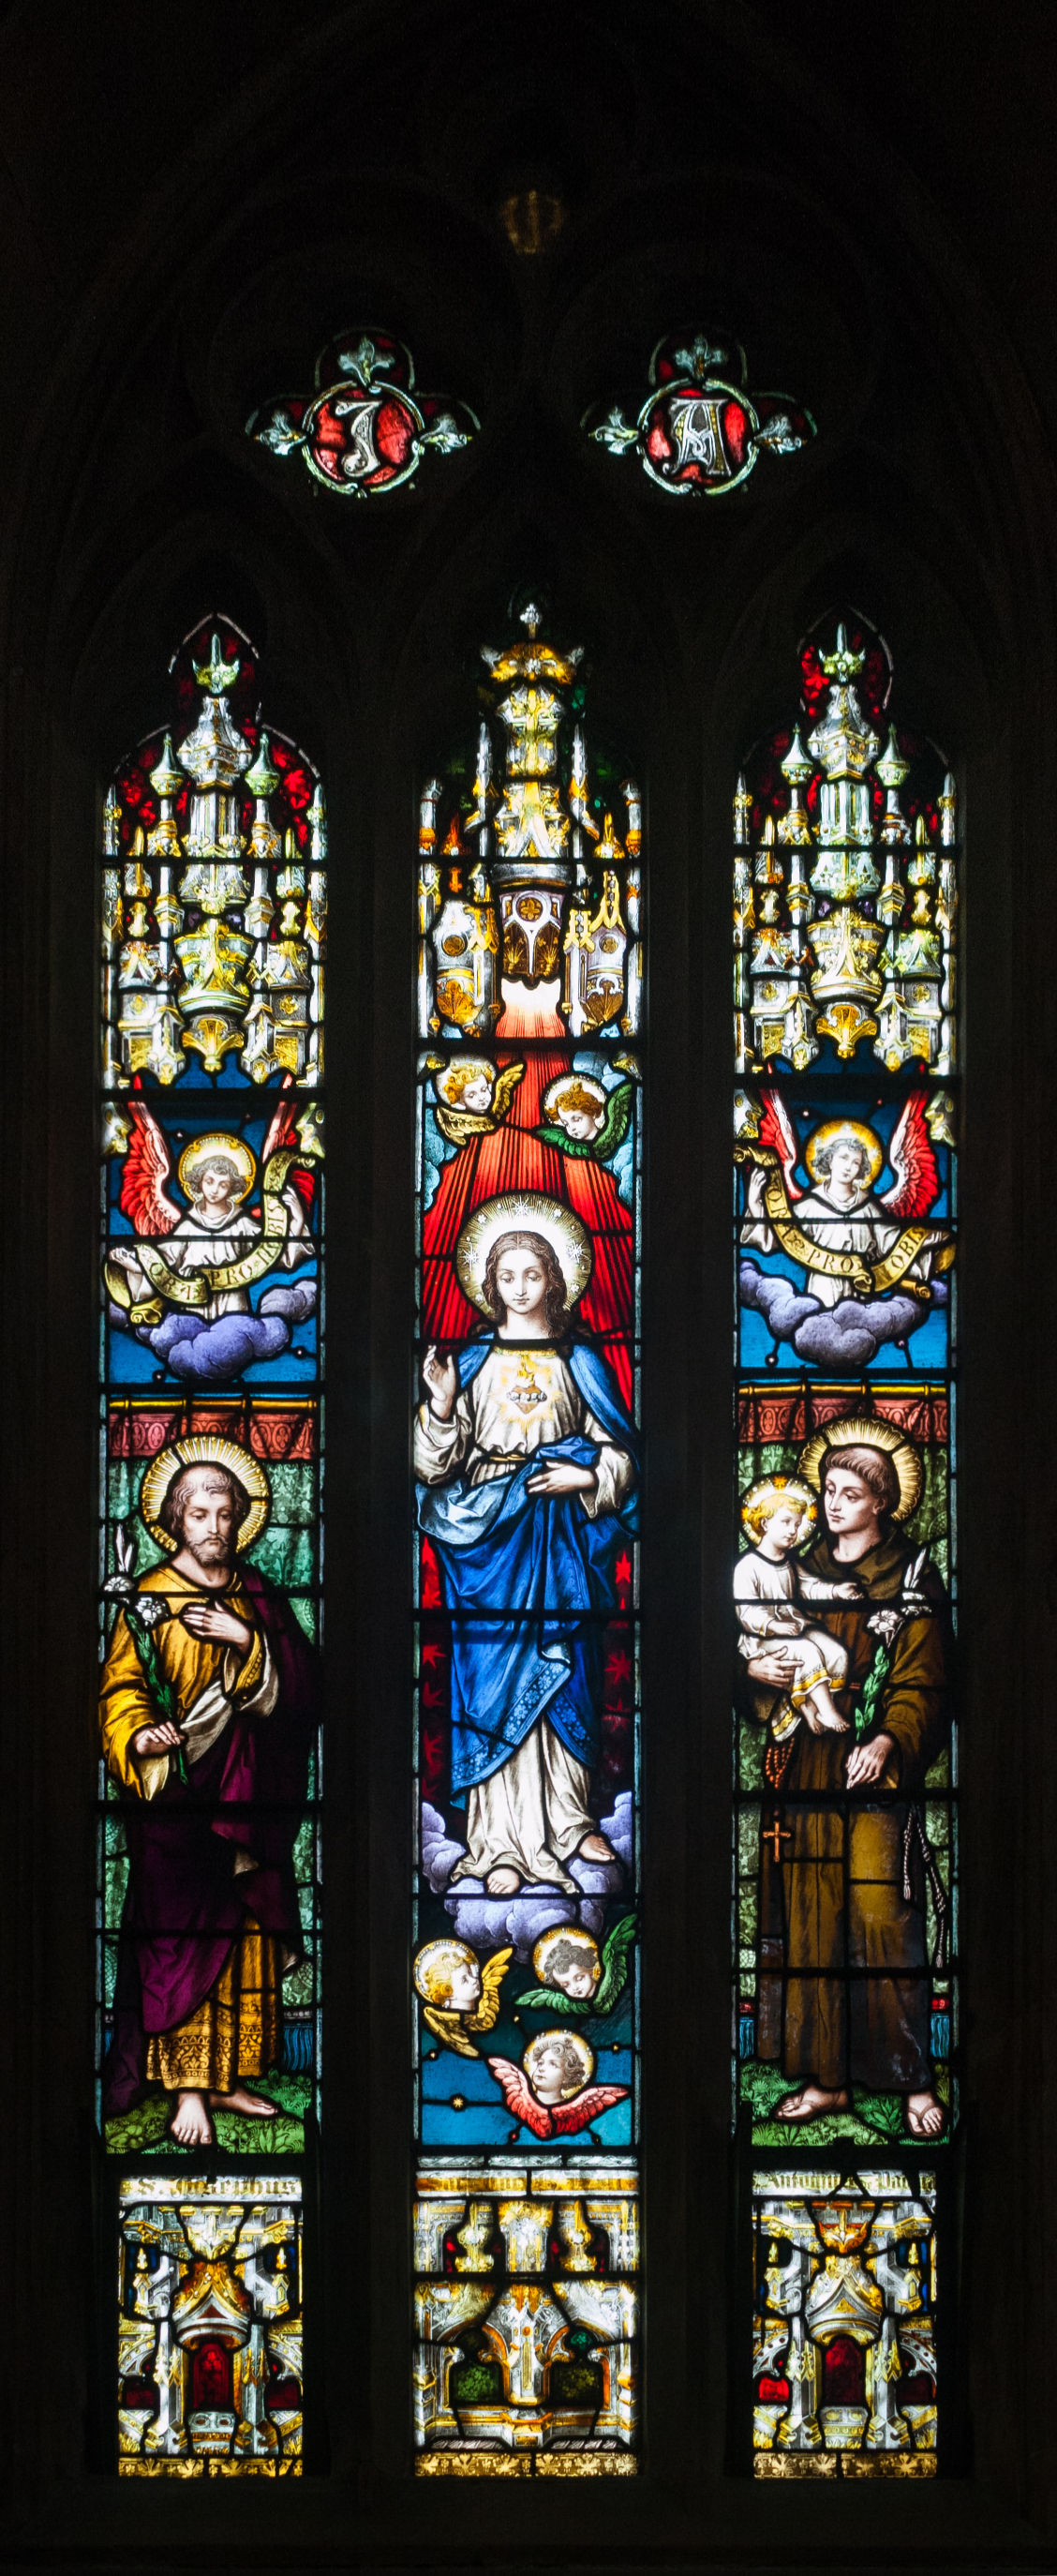 Derry St. Eugene's Cathedral South Aisle Window 7 Immaculate Heart of Mary with Saints Joseph and Anthony of Padua 2013 09 17